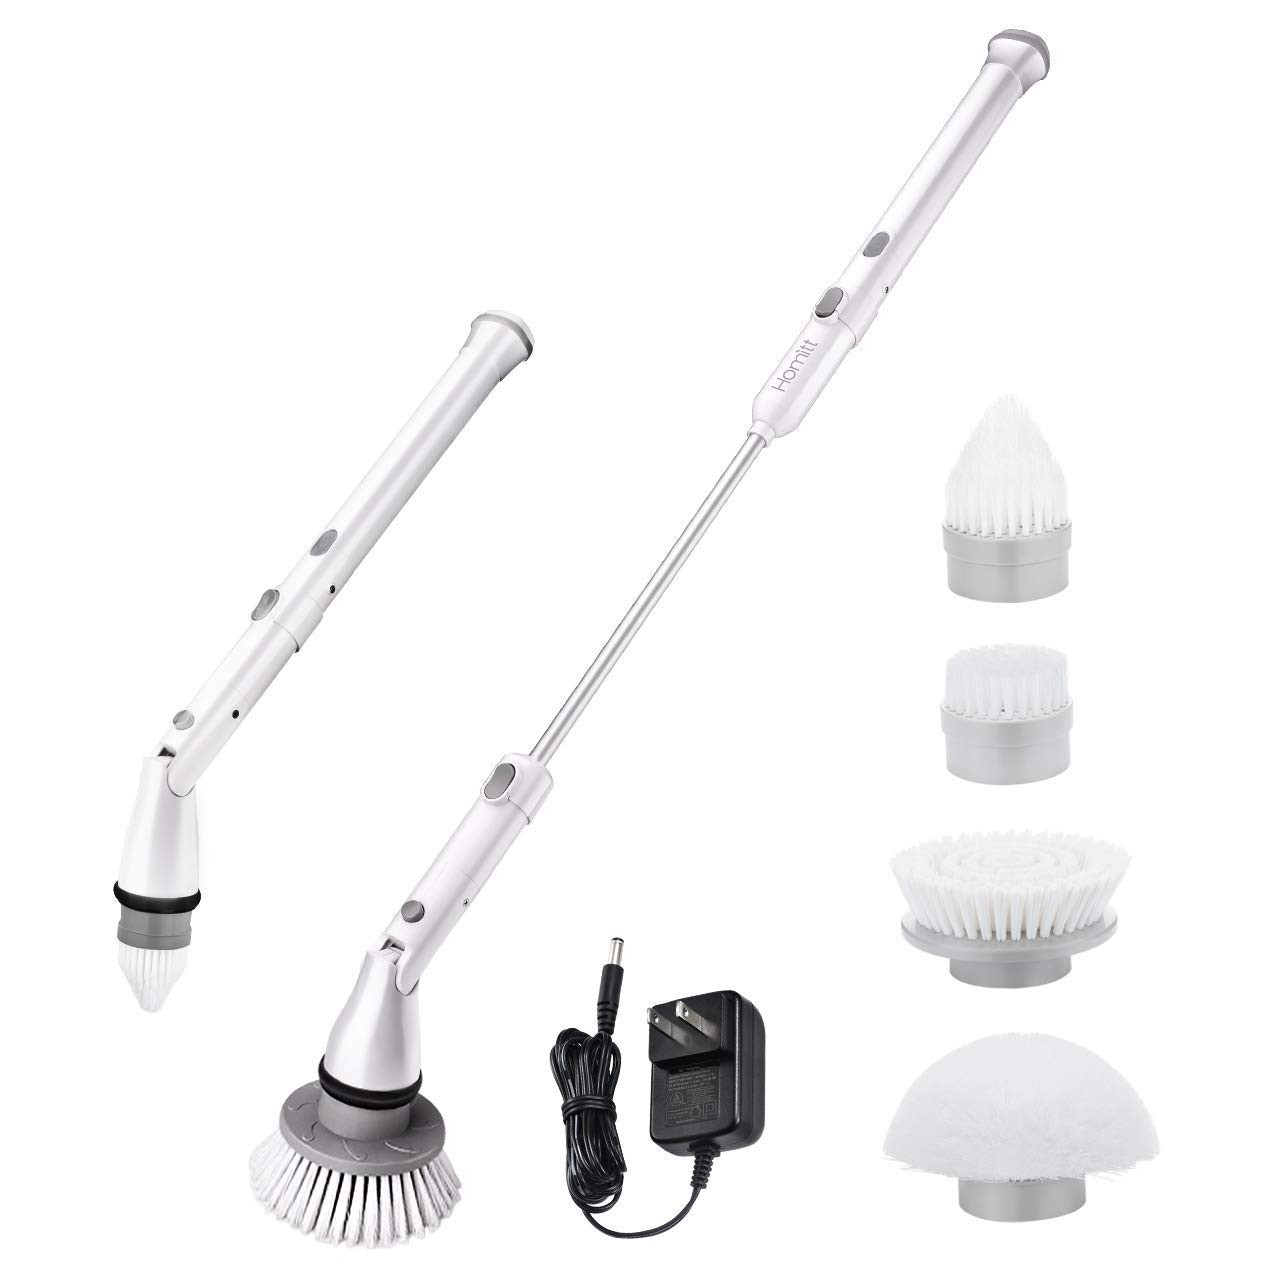 Homitt Electric Spin Scrubber 360 Cordless Bathroom Scrubber With